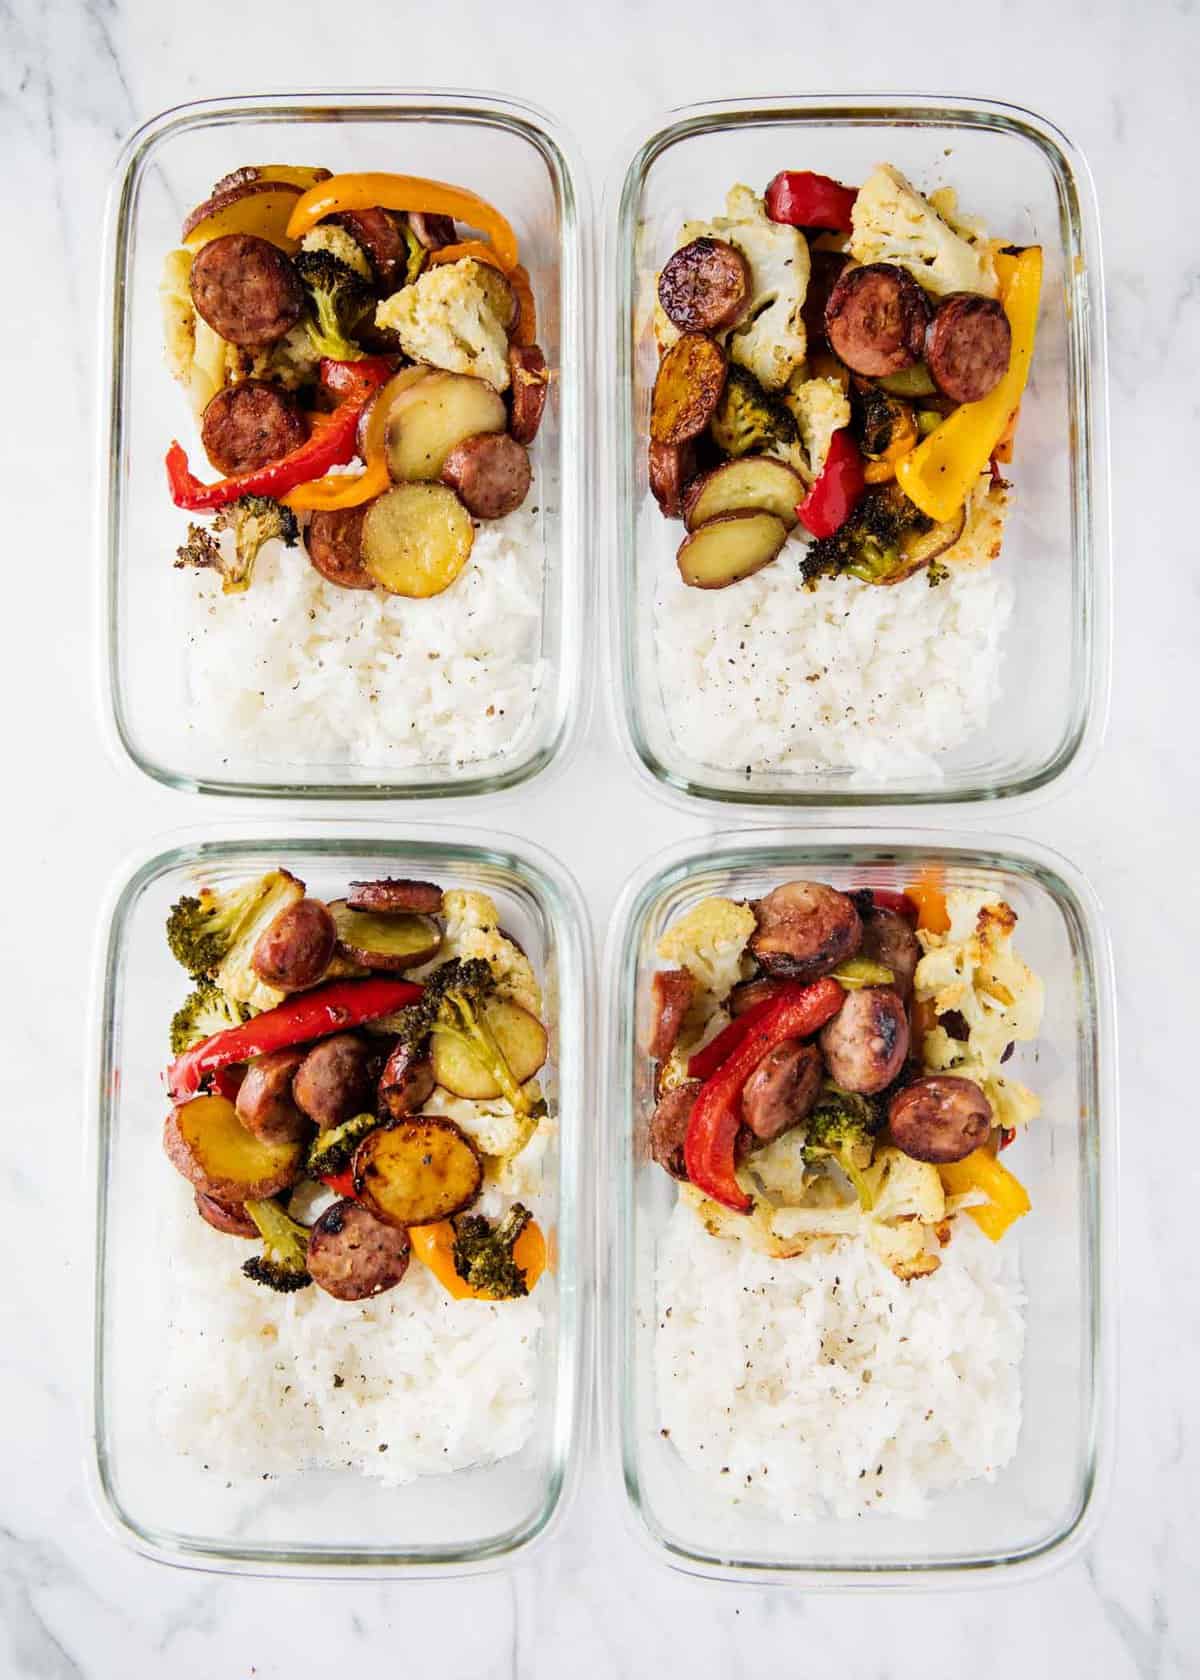 Sausage and veggies in meal prep containers with rice.